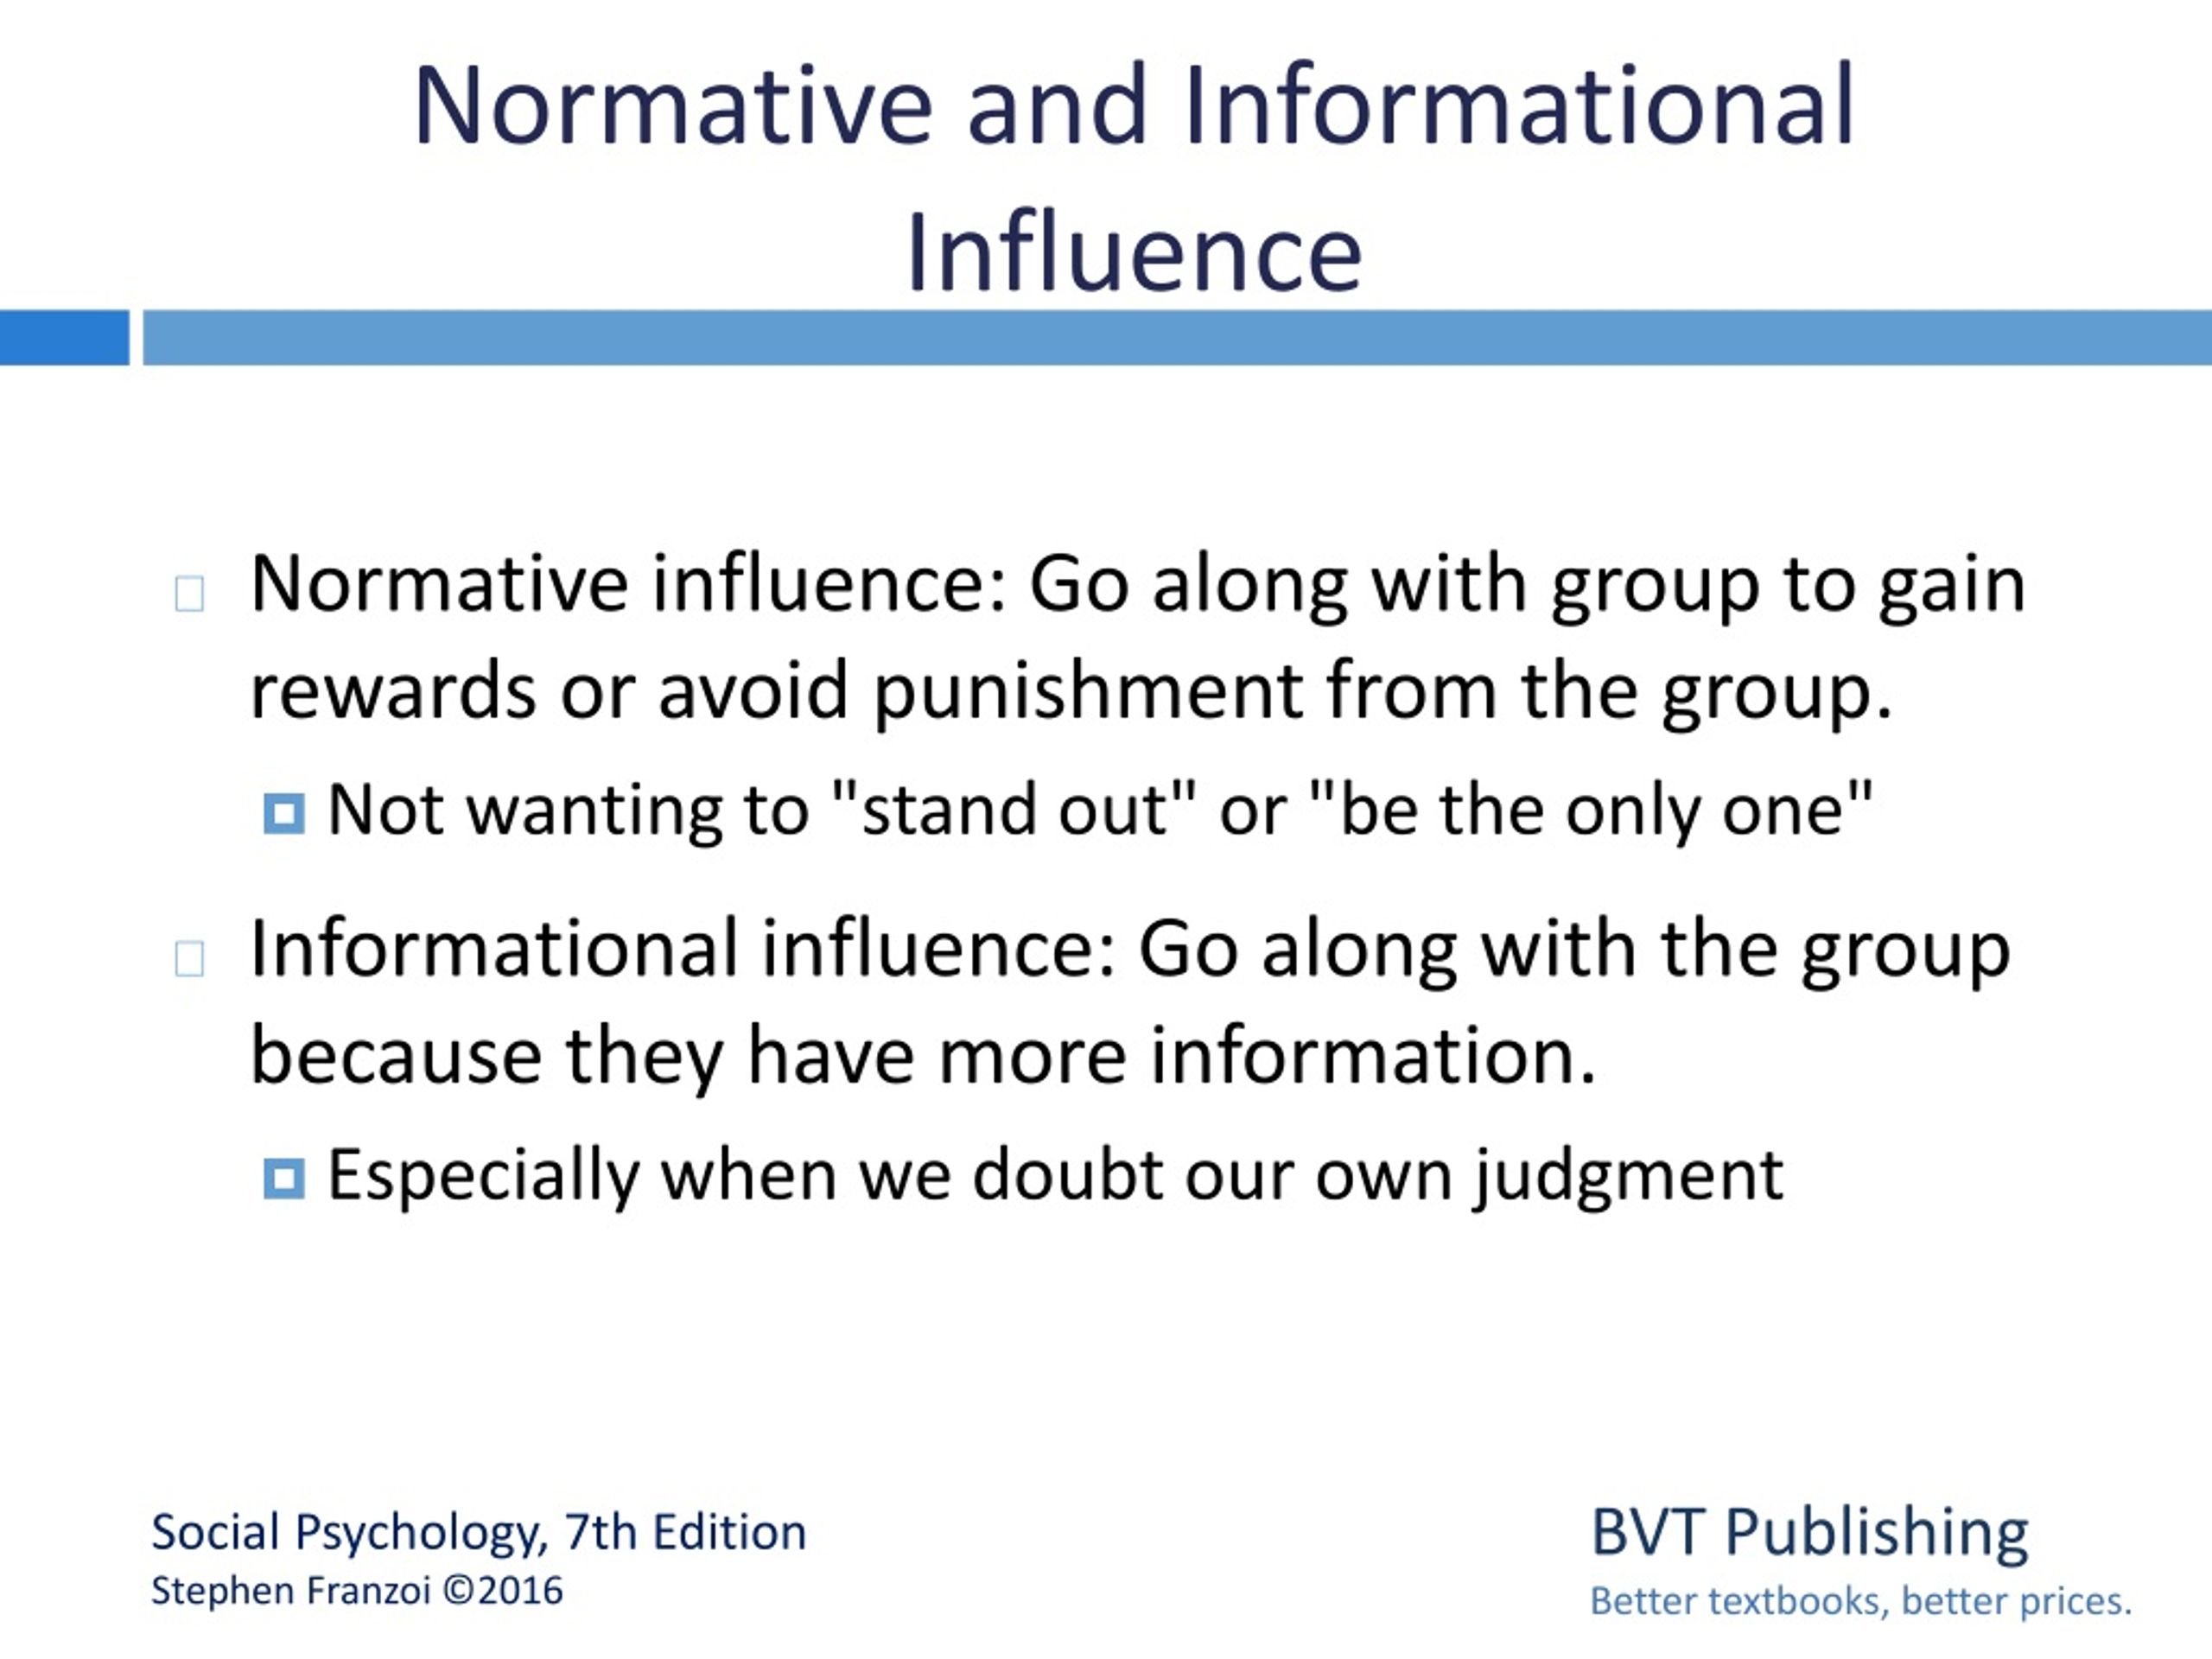 research support for normative influence